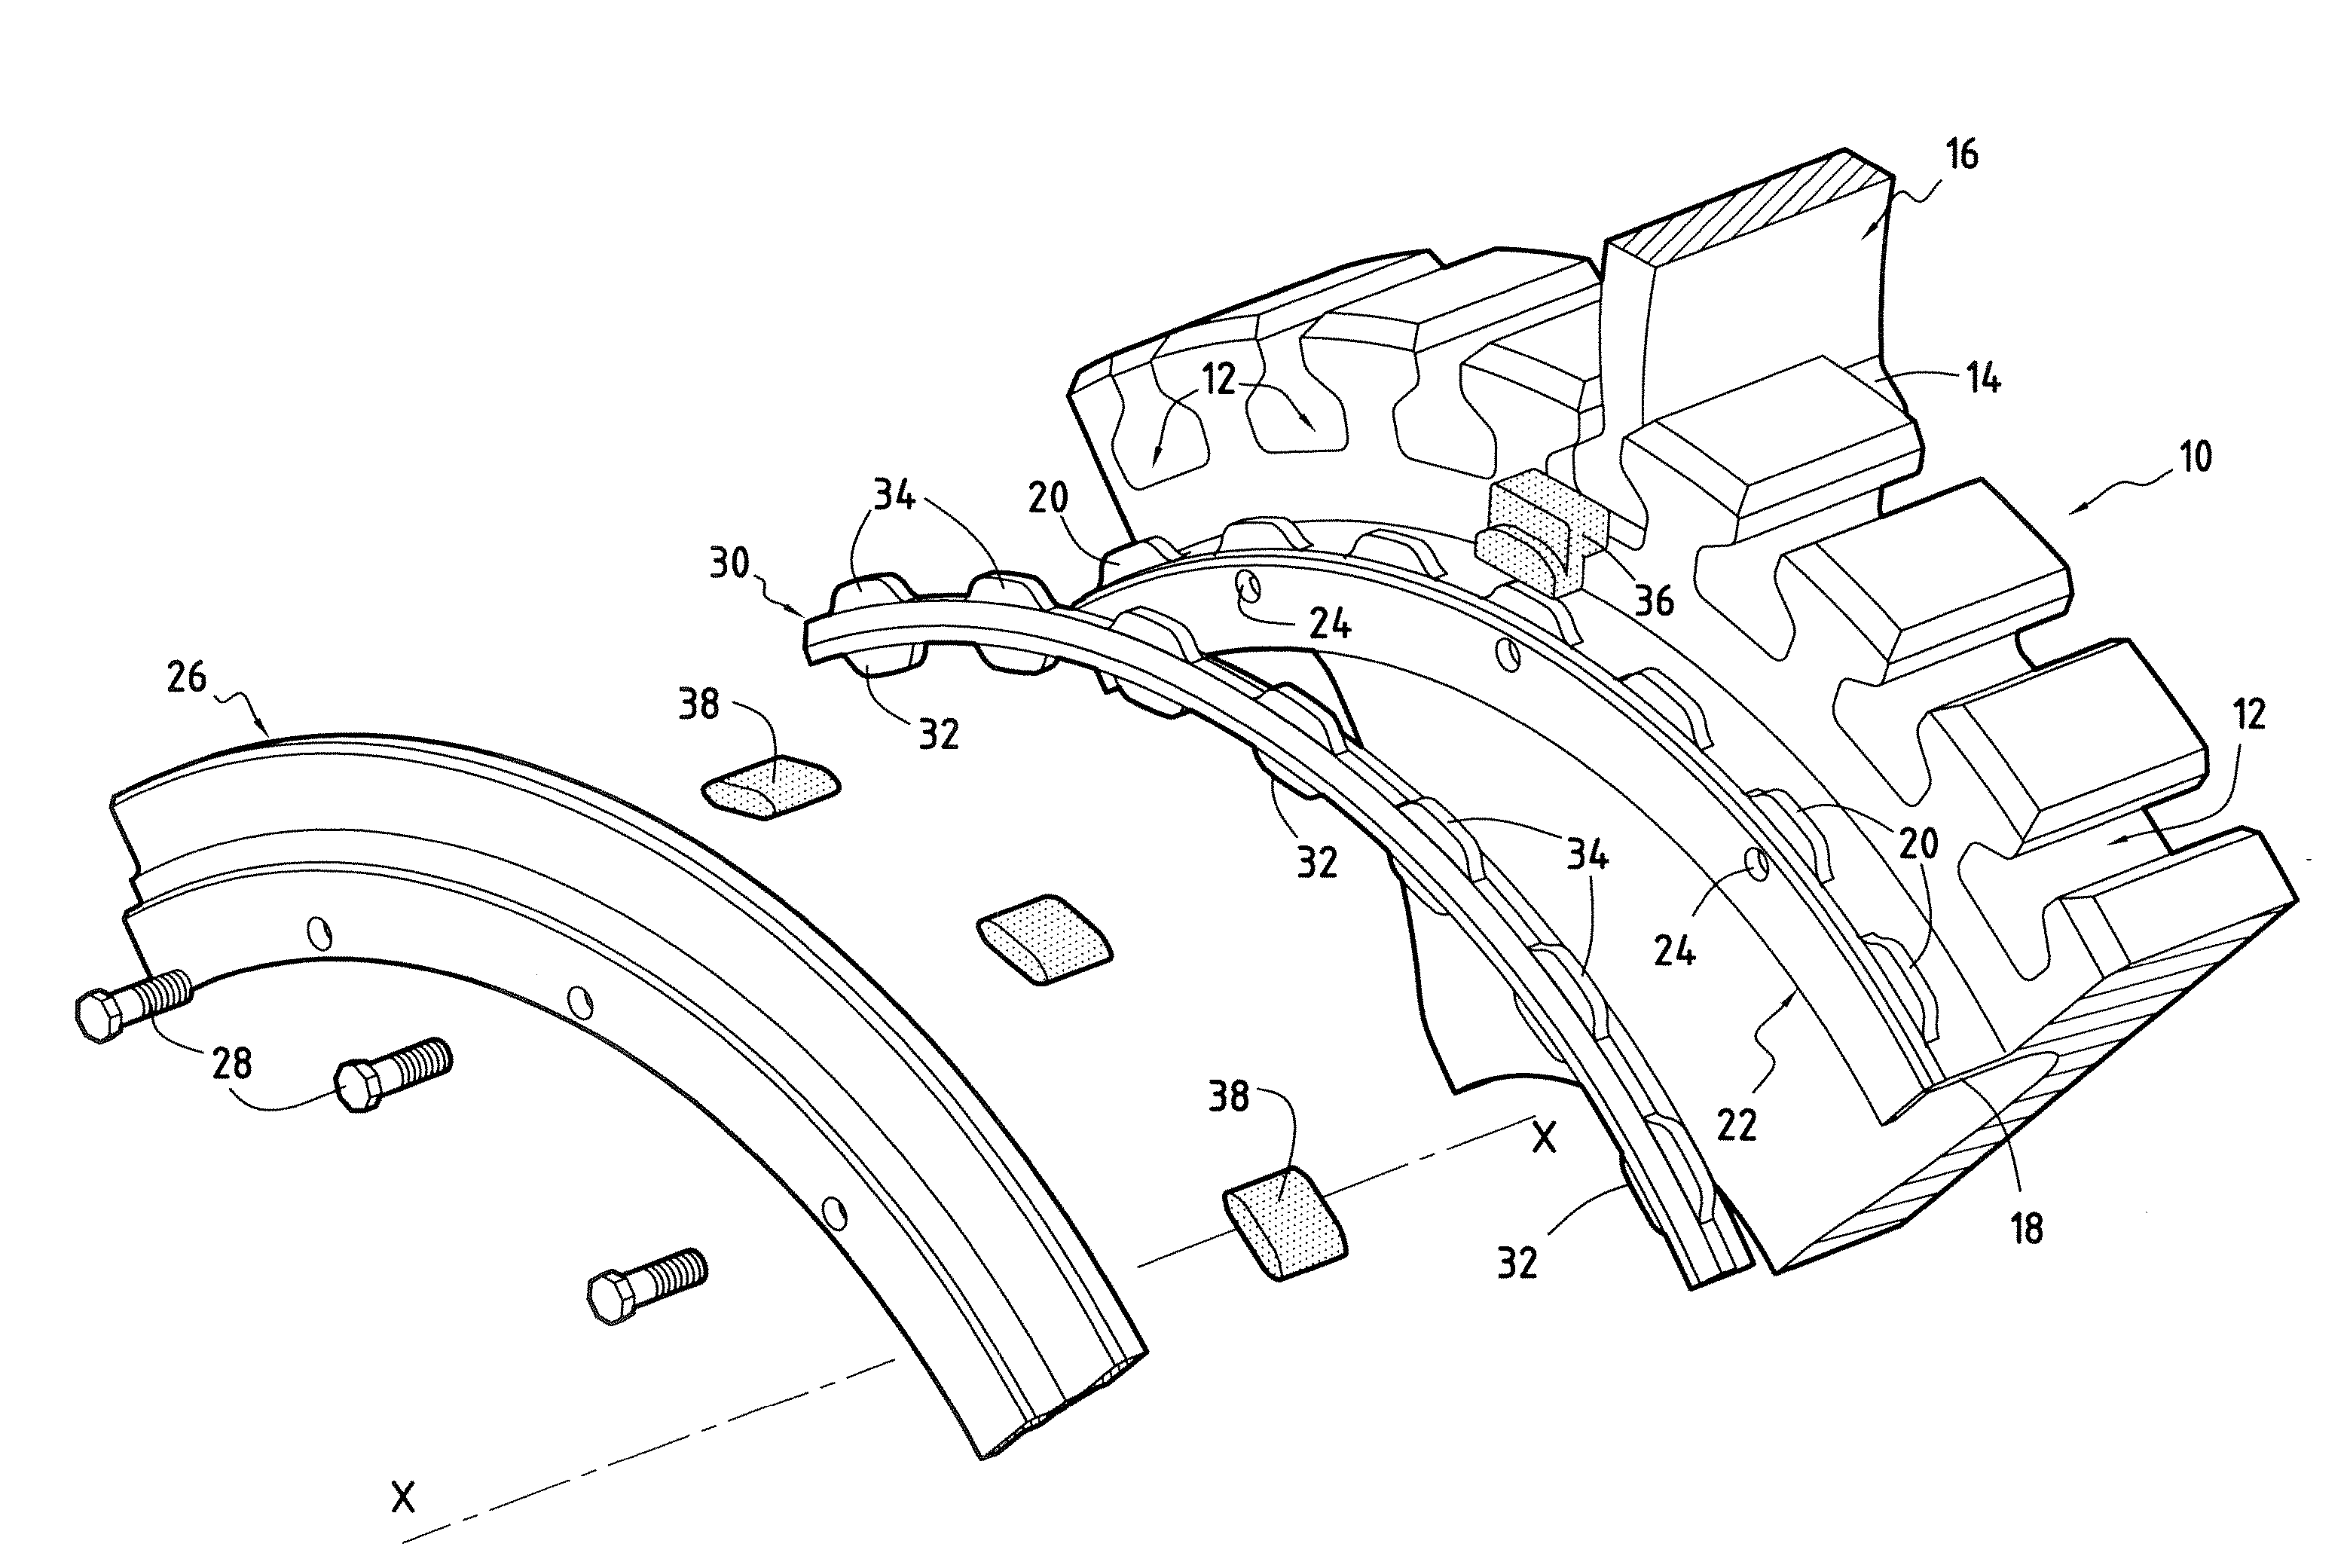 A device for damping vibration of a ring for axially retaining turbomachine fan blades